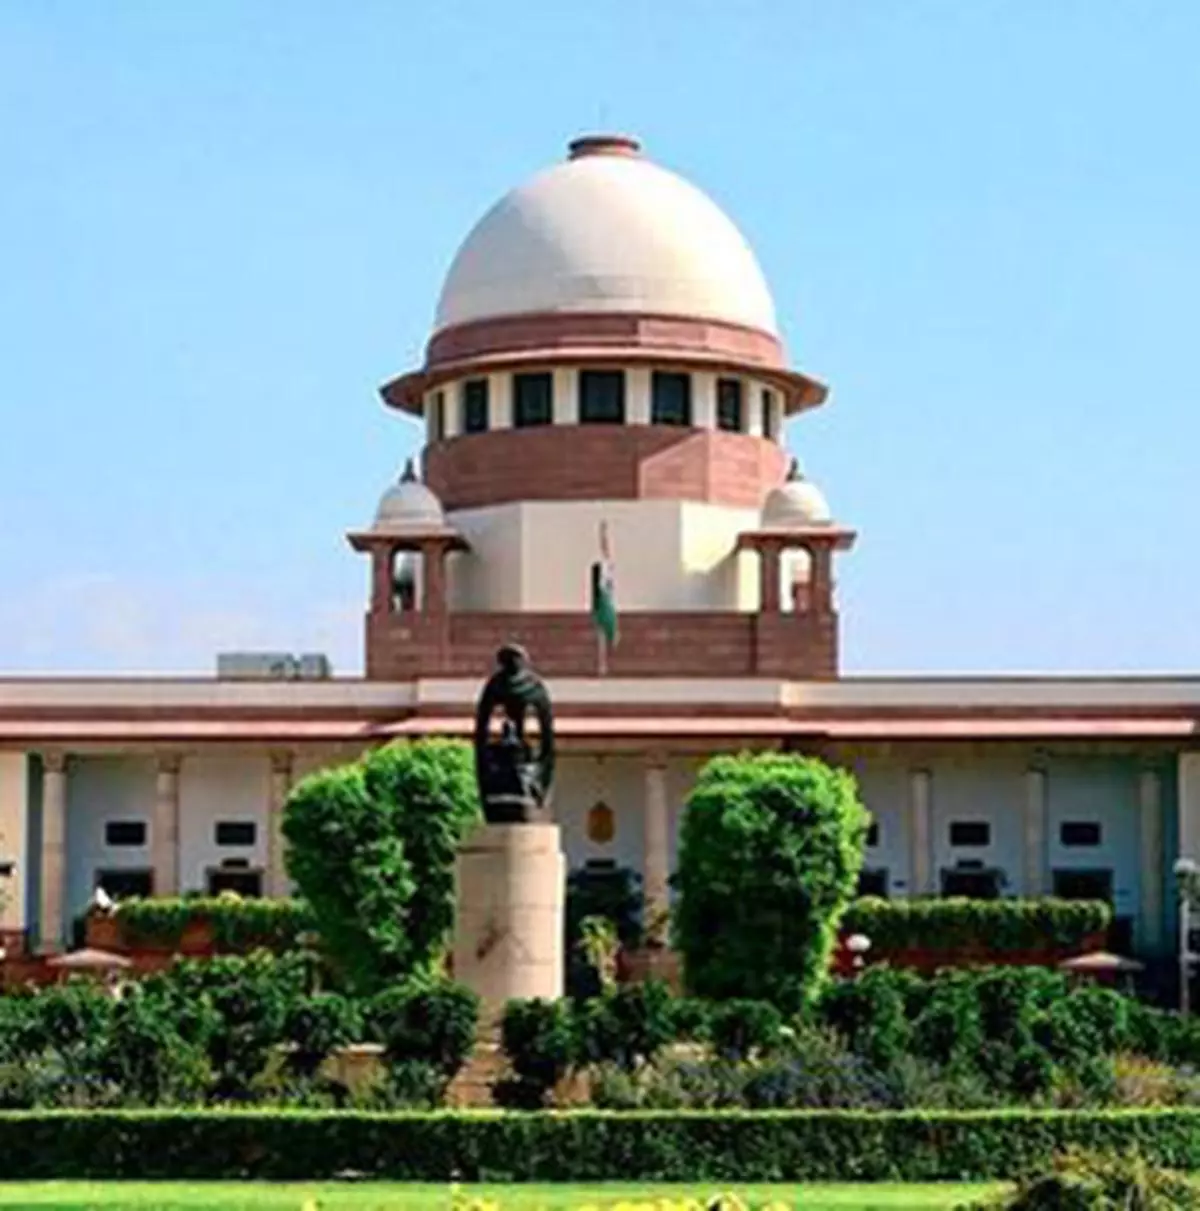 The apex court’s ruling will have some impact on the GST Council’s functioning